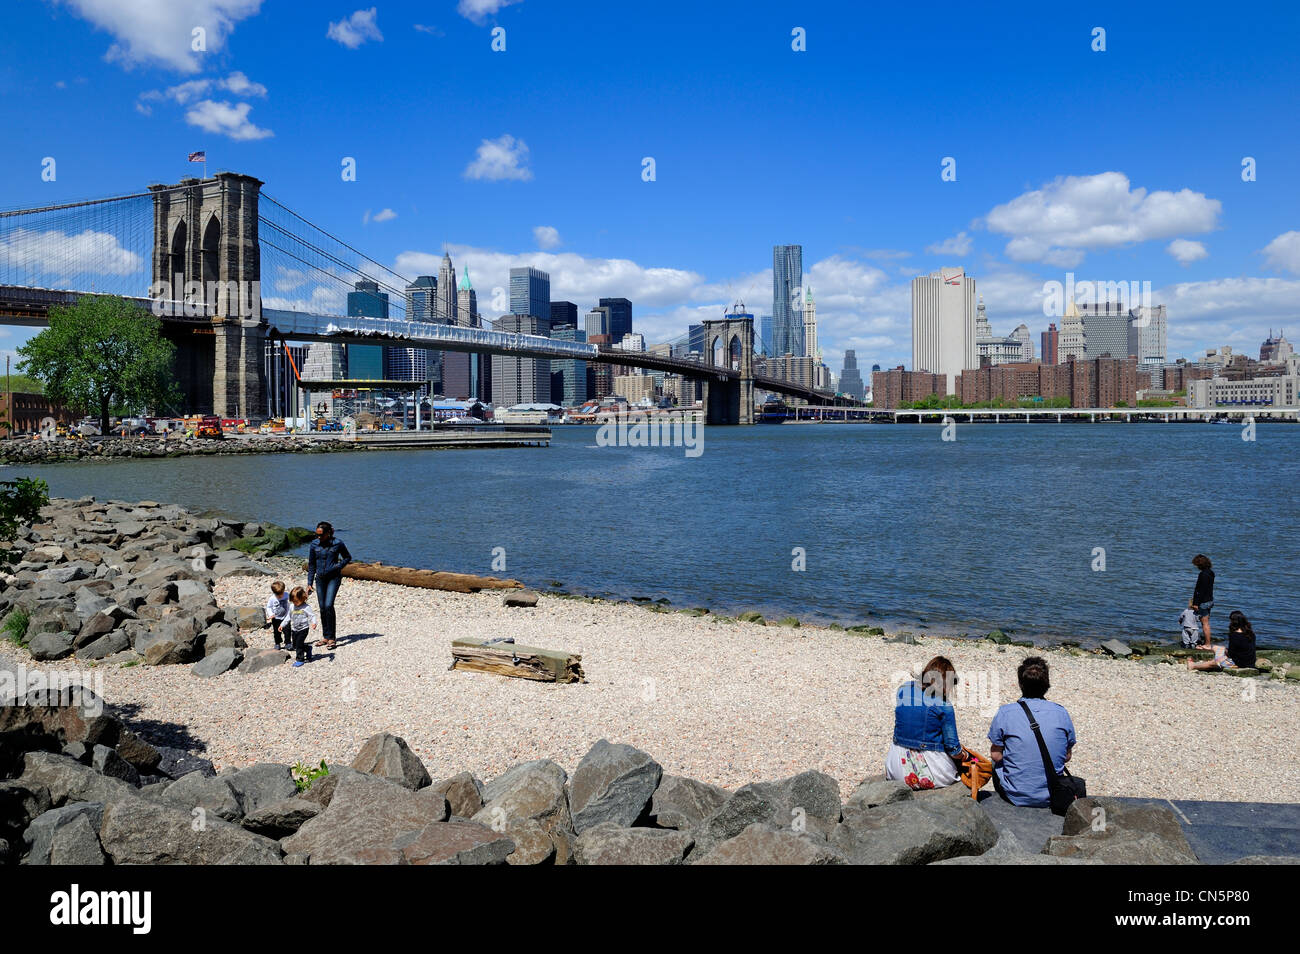 United States, New York City, Brooklyn Bridge from Brooklyn Bridge Park and the Beekman Tower from the architect Frank Gehry Stock Photo